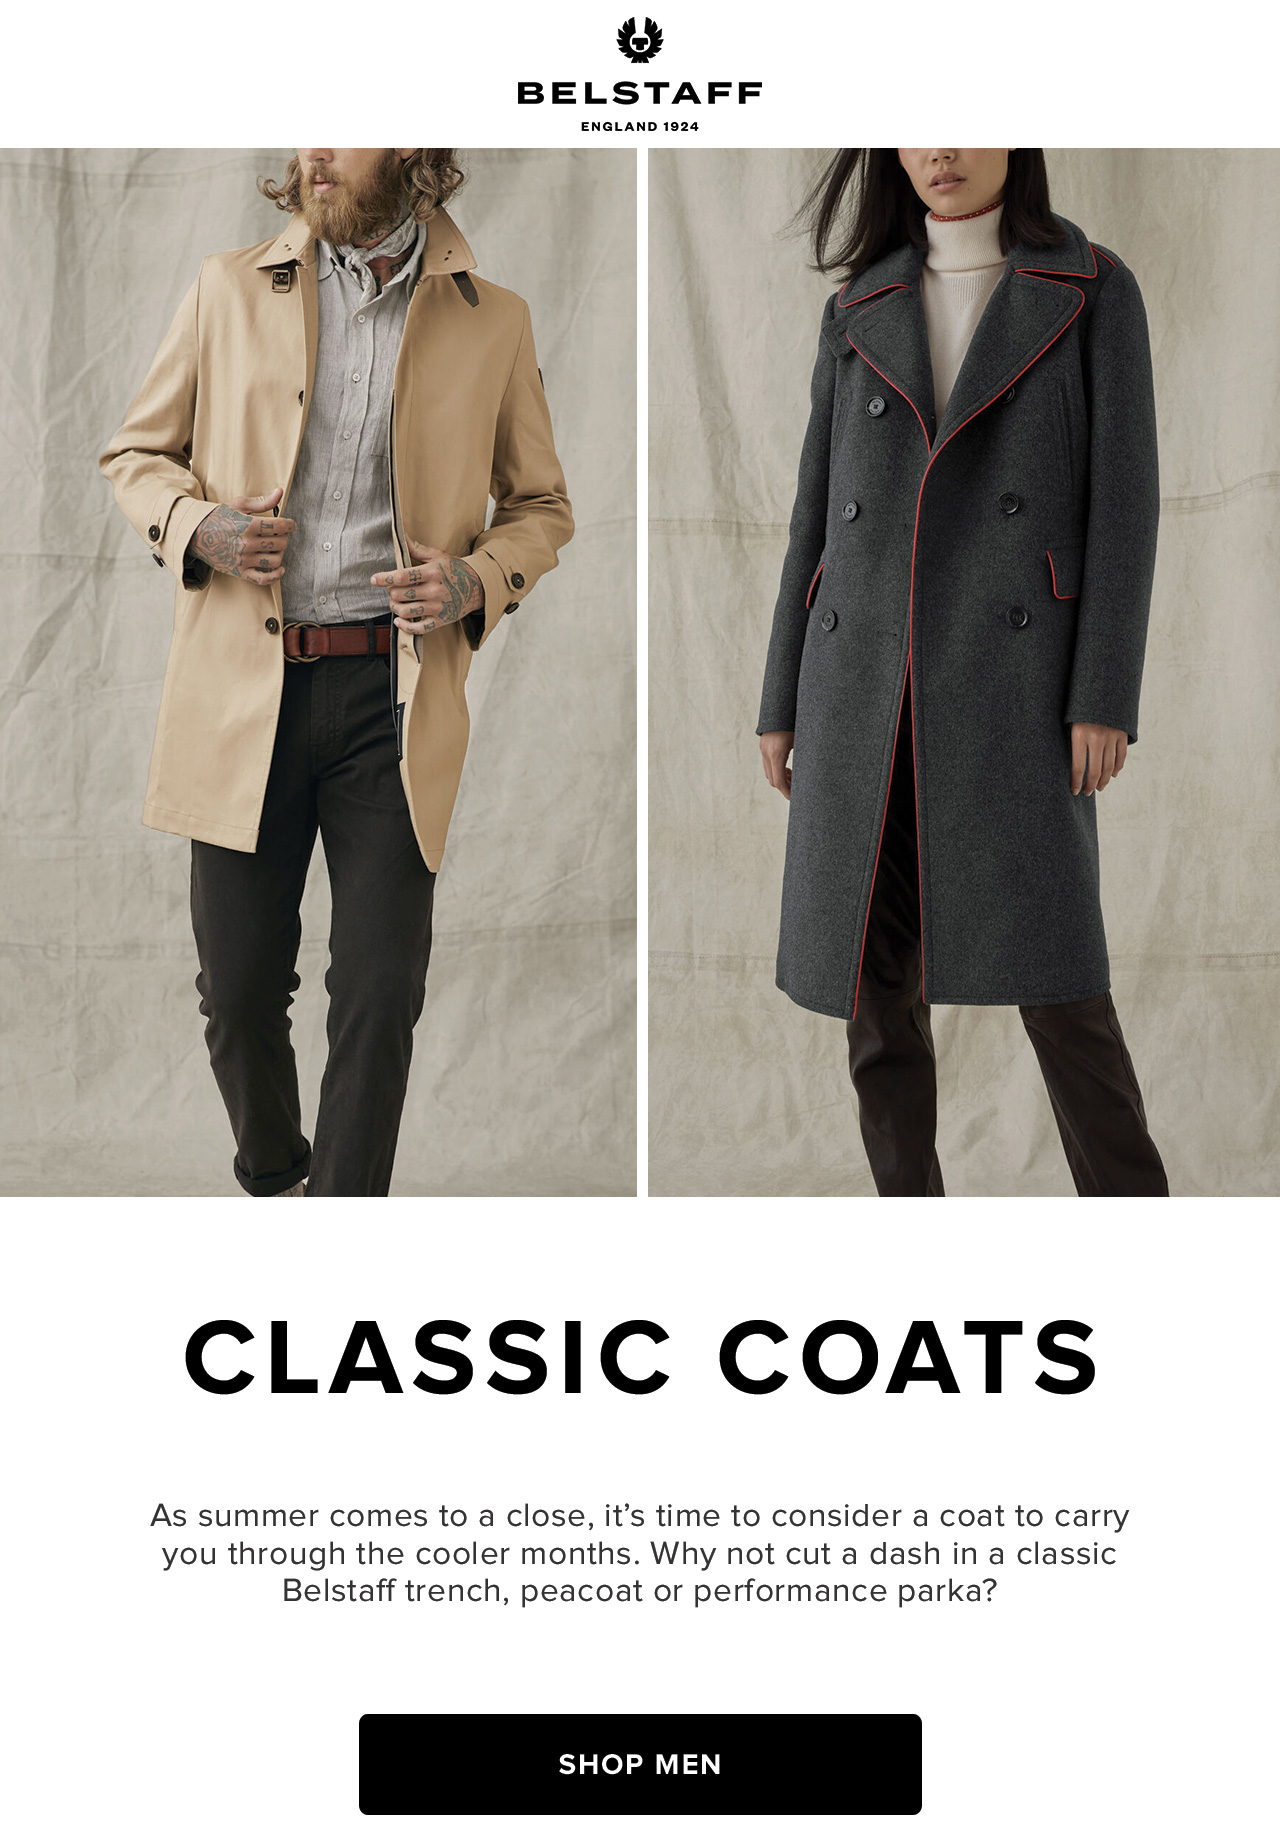 As summer comes to a close, it's time to consider a coat to carry you through the cooler months. Why not cut a dash in a classic Belstaff trench, peacoat or performance parka?